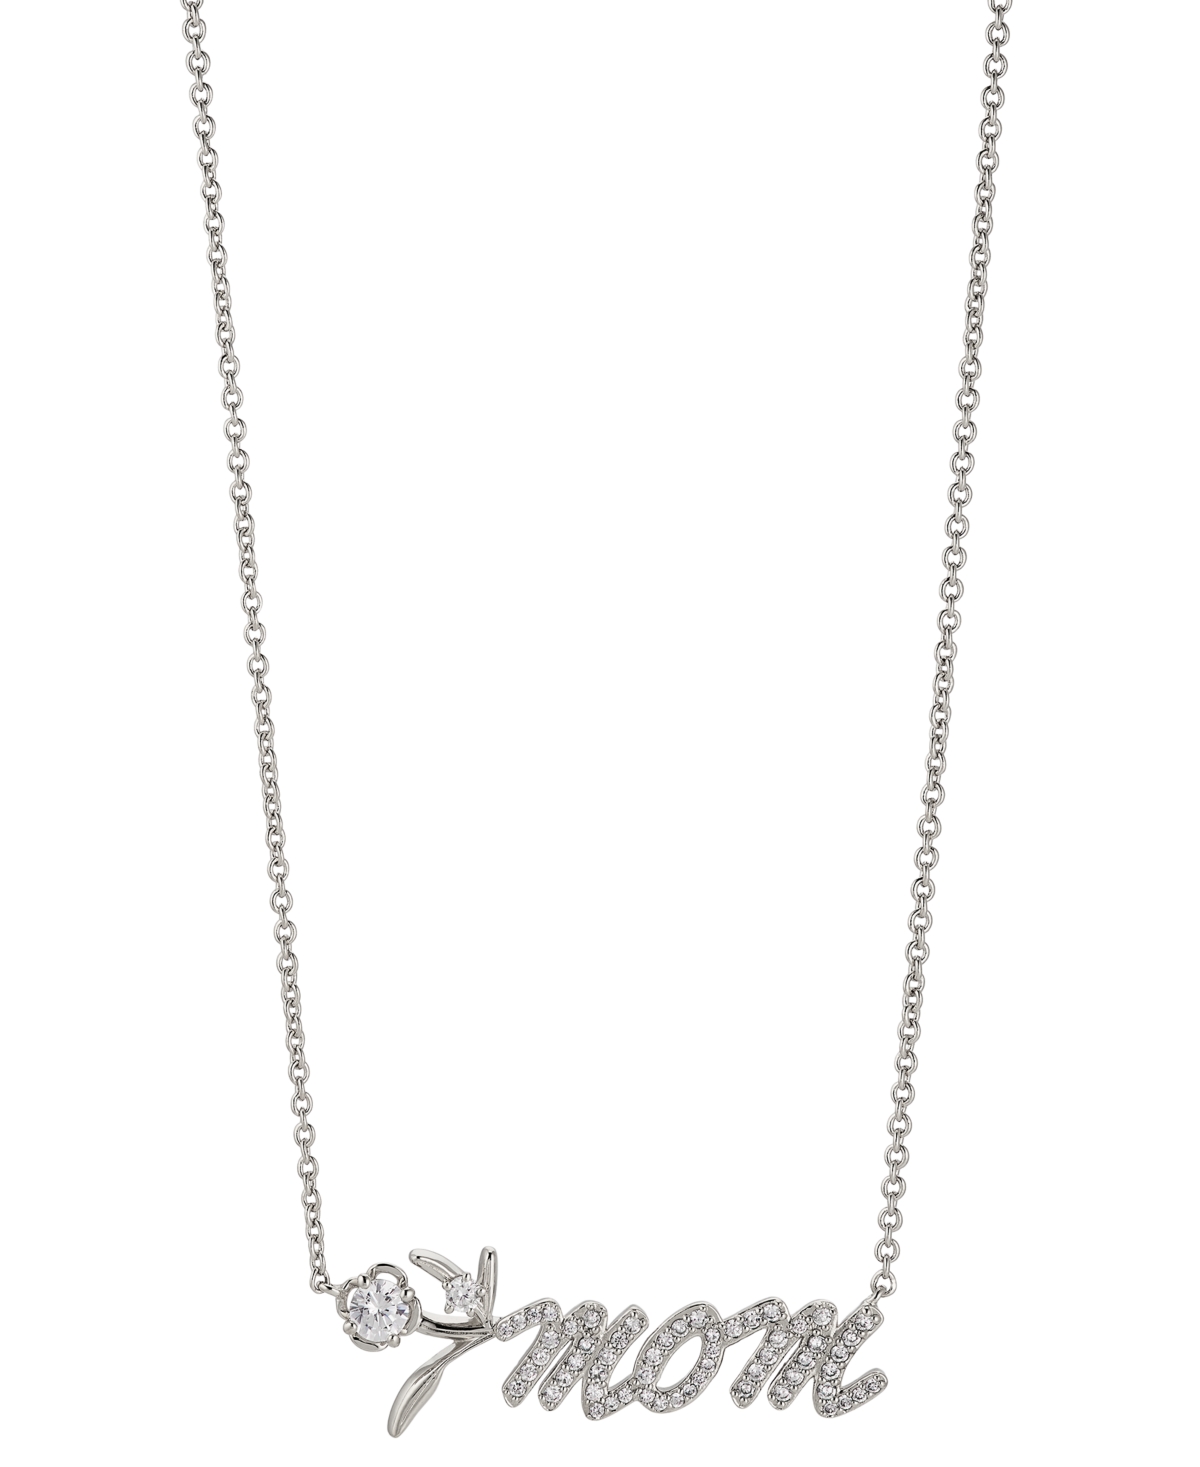 Rhodium-Plated Cubic Zirconia Mom Blossoms Pendant Necklace, 16" + 2" extender, Created for Macy's - Rhodium